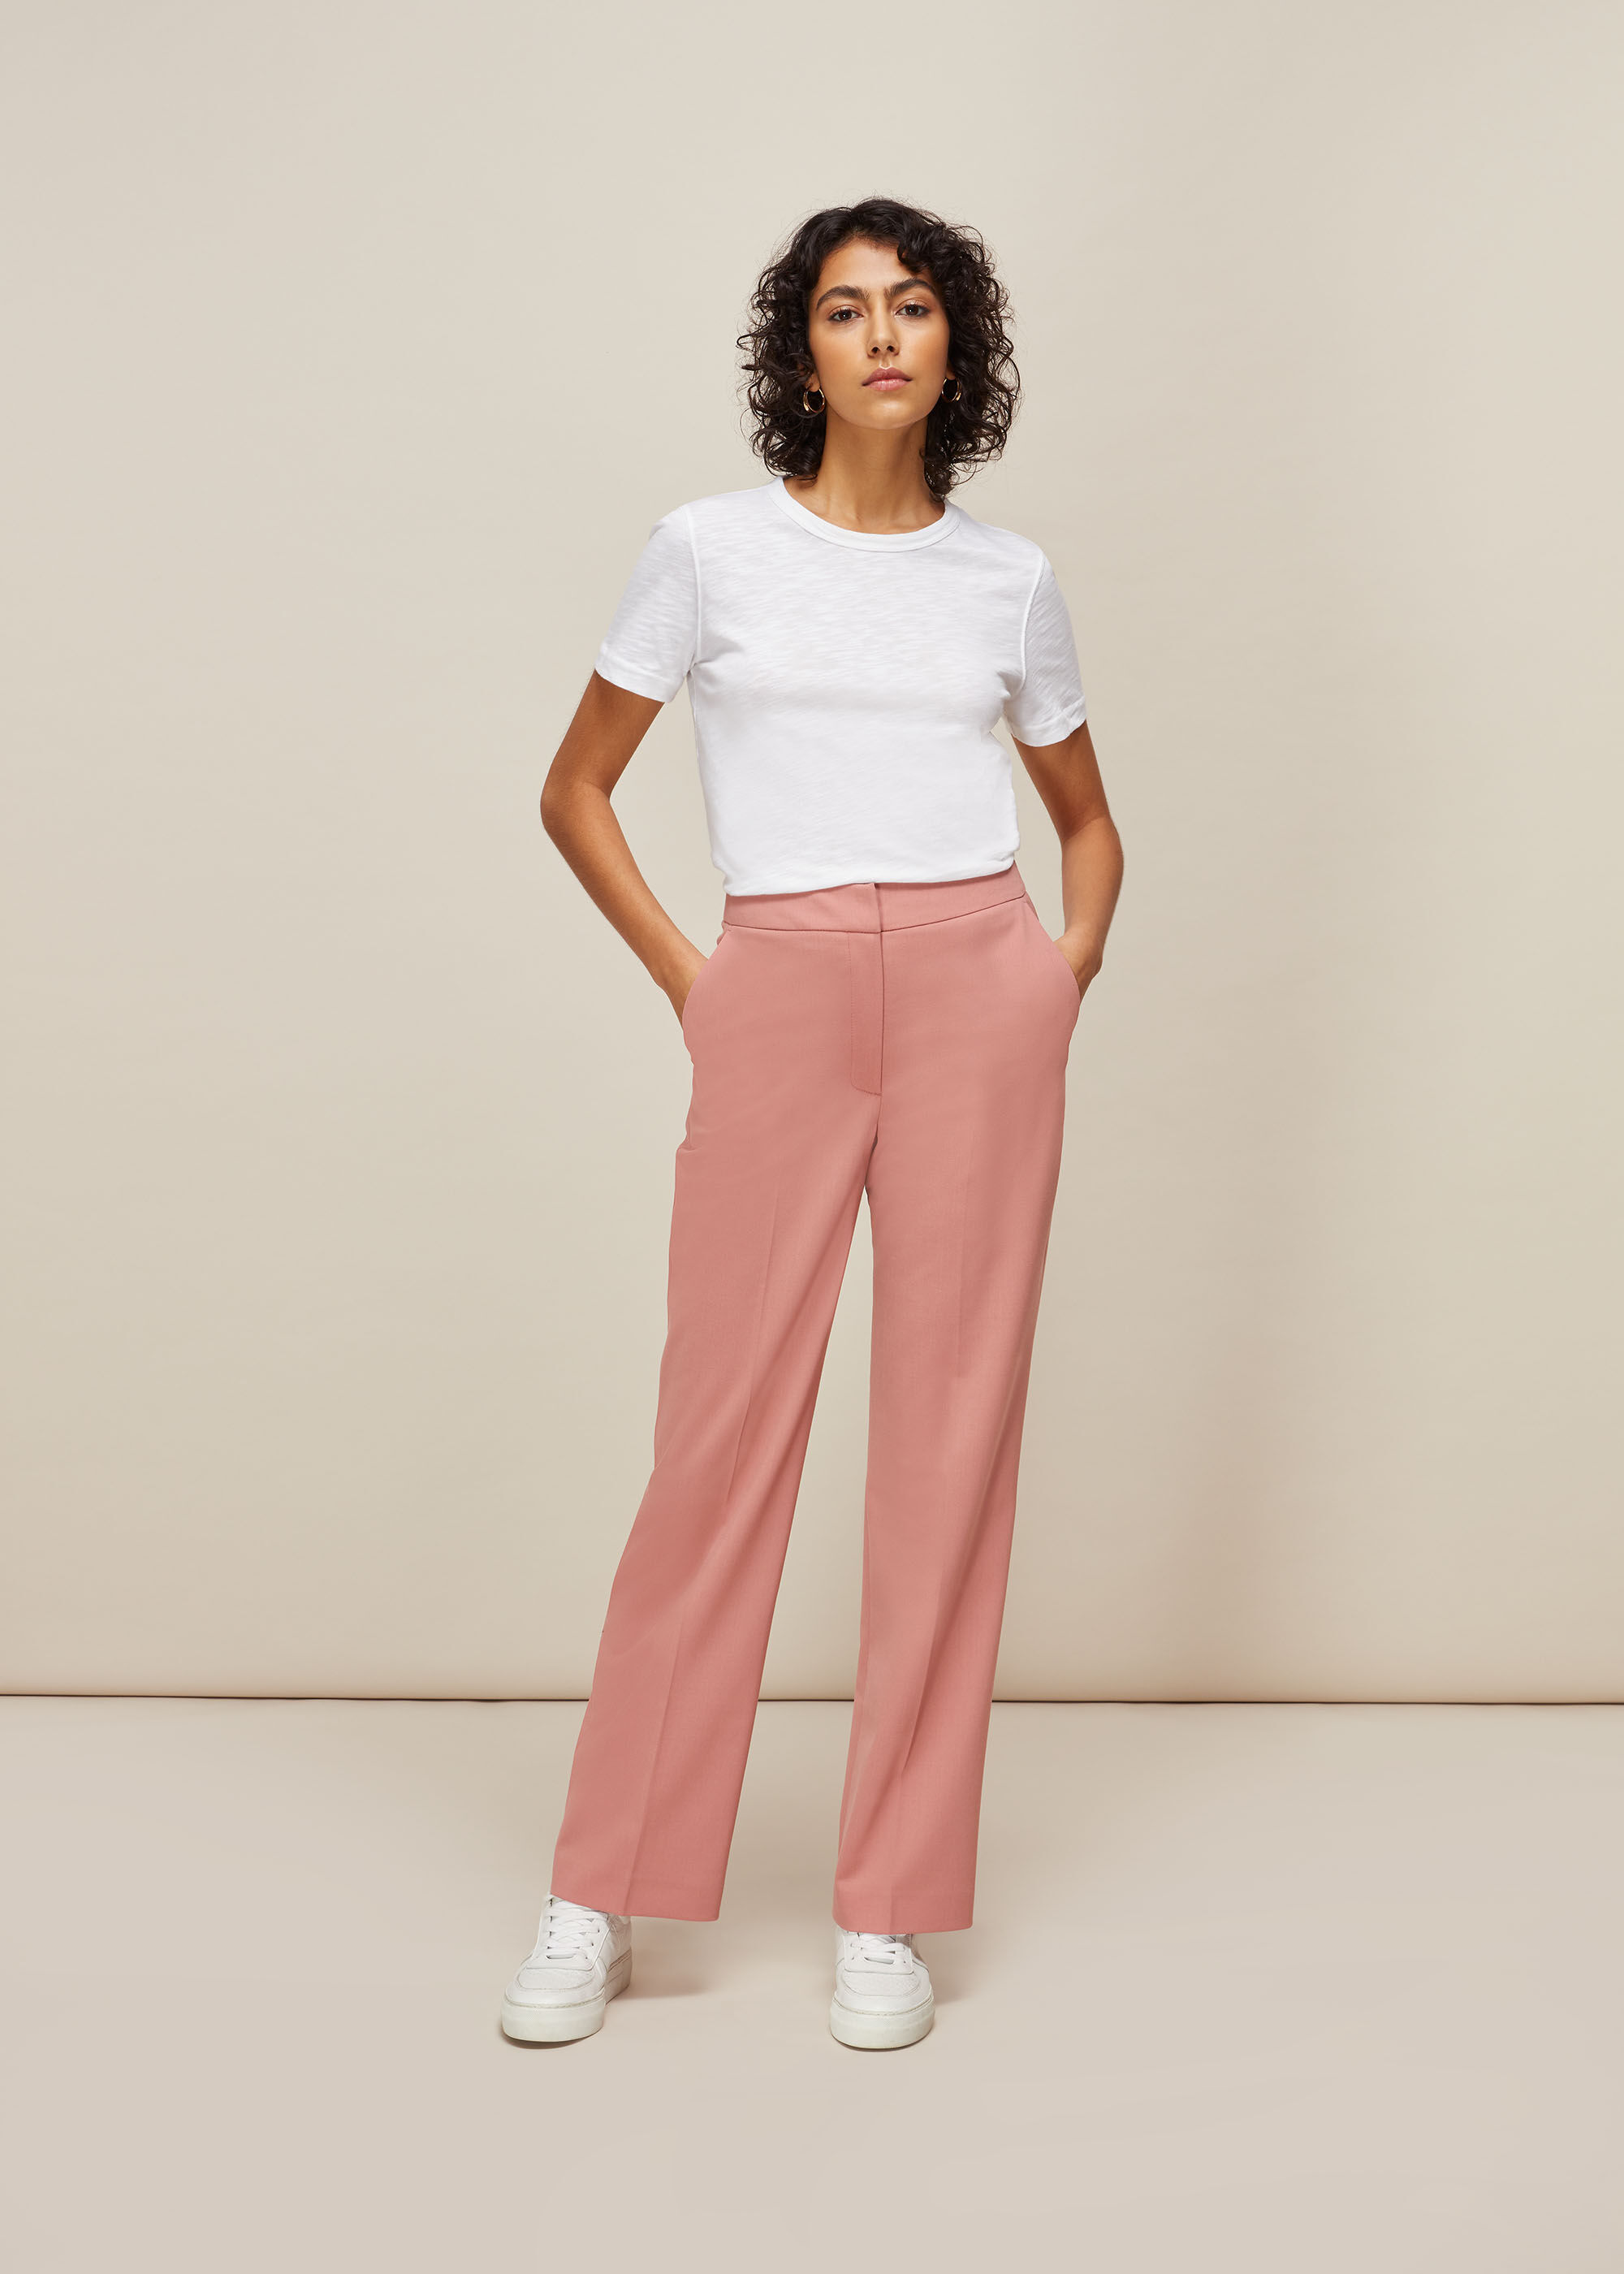 Tall Pale Pink Tie Waist Crop Trousers  New Look